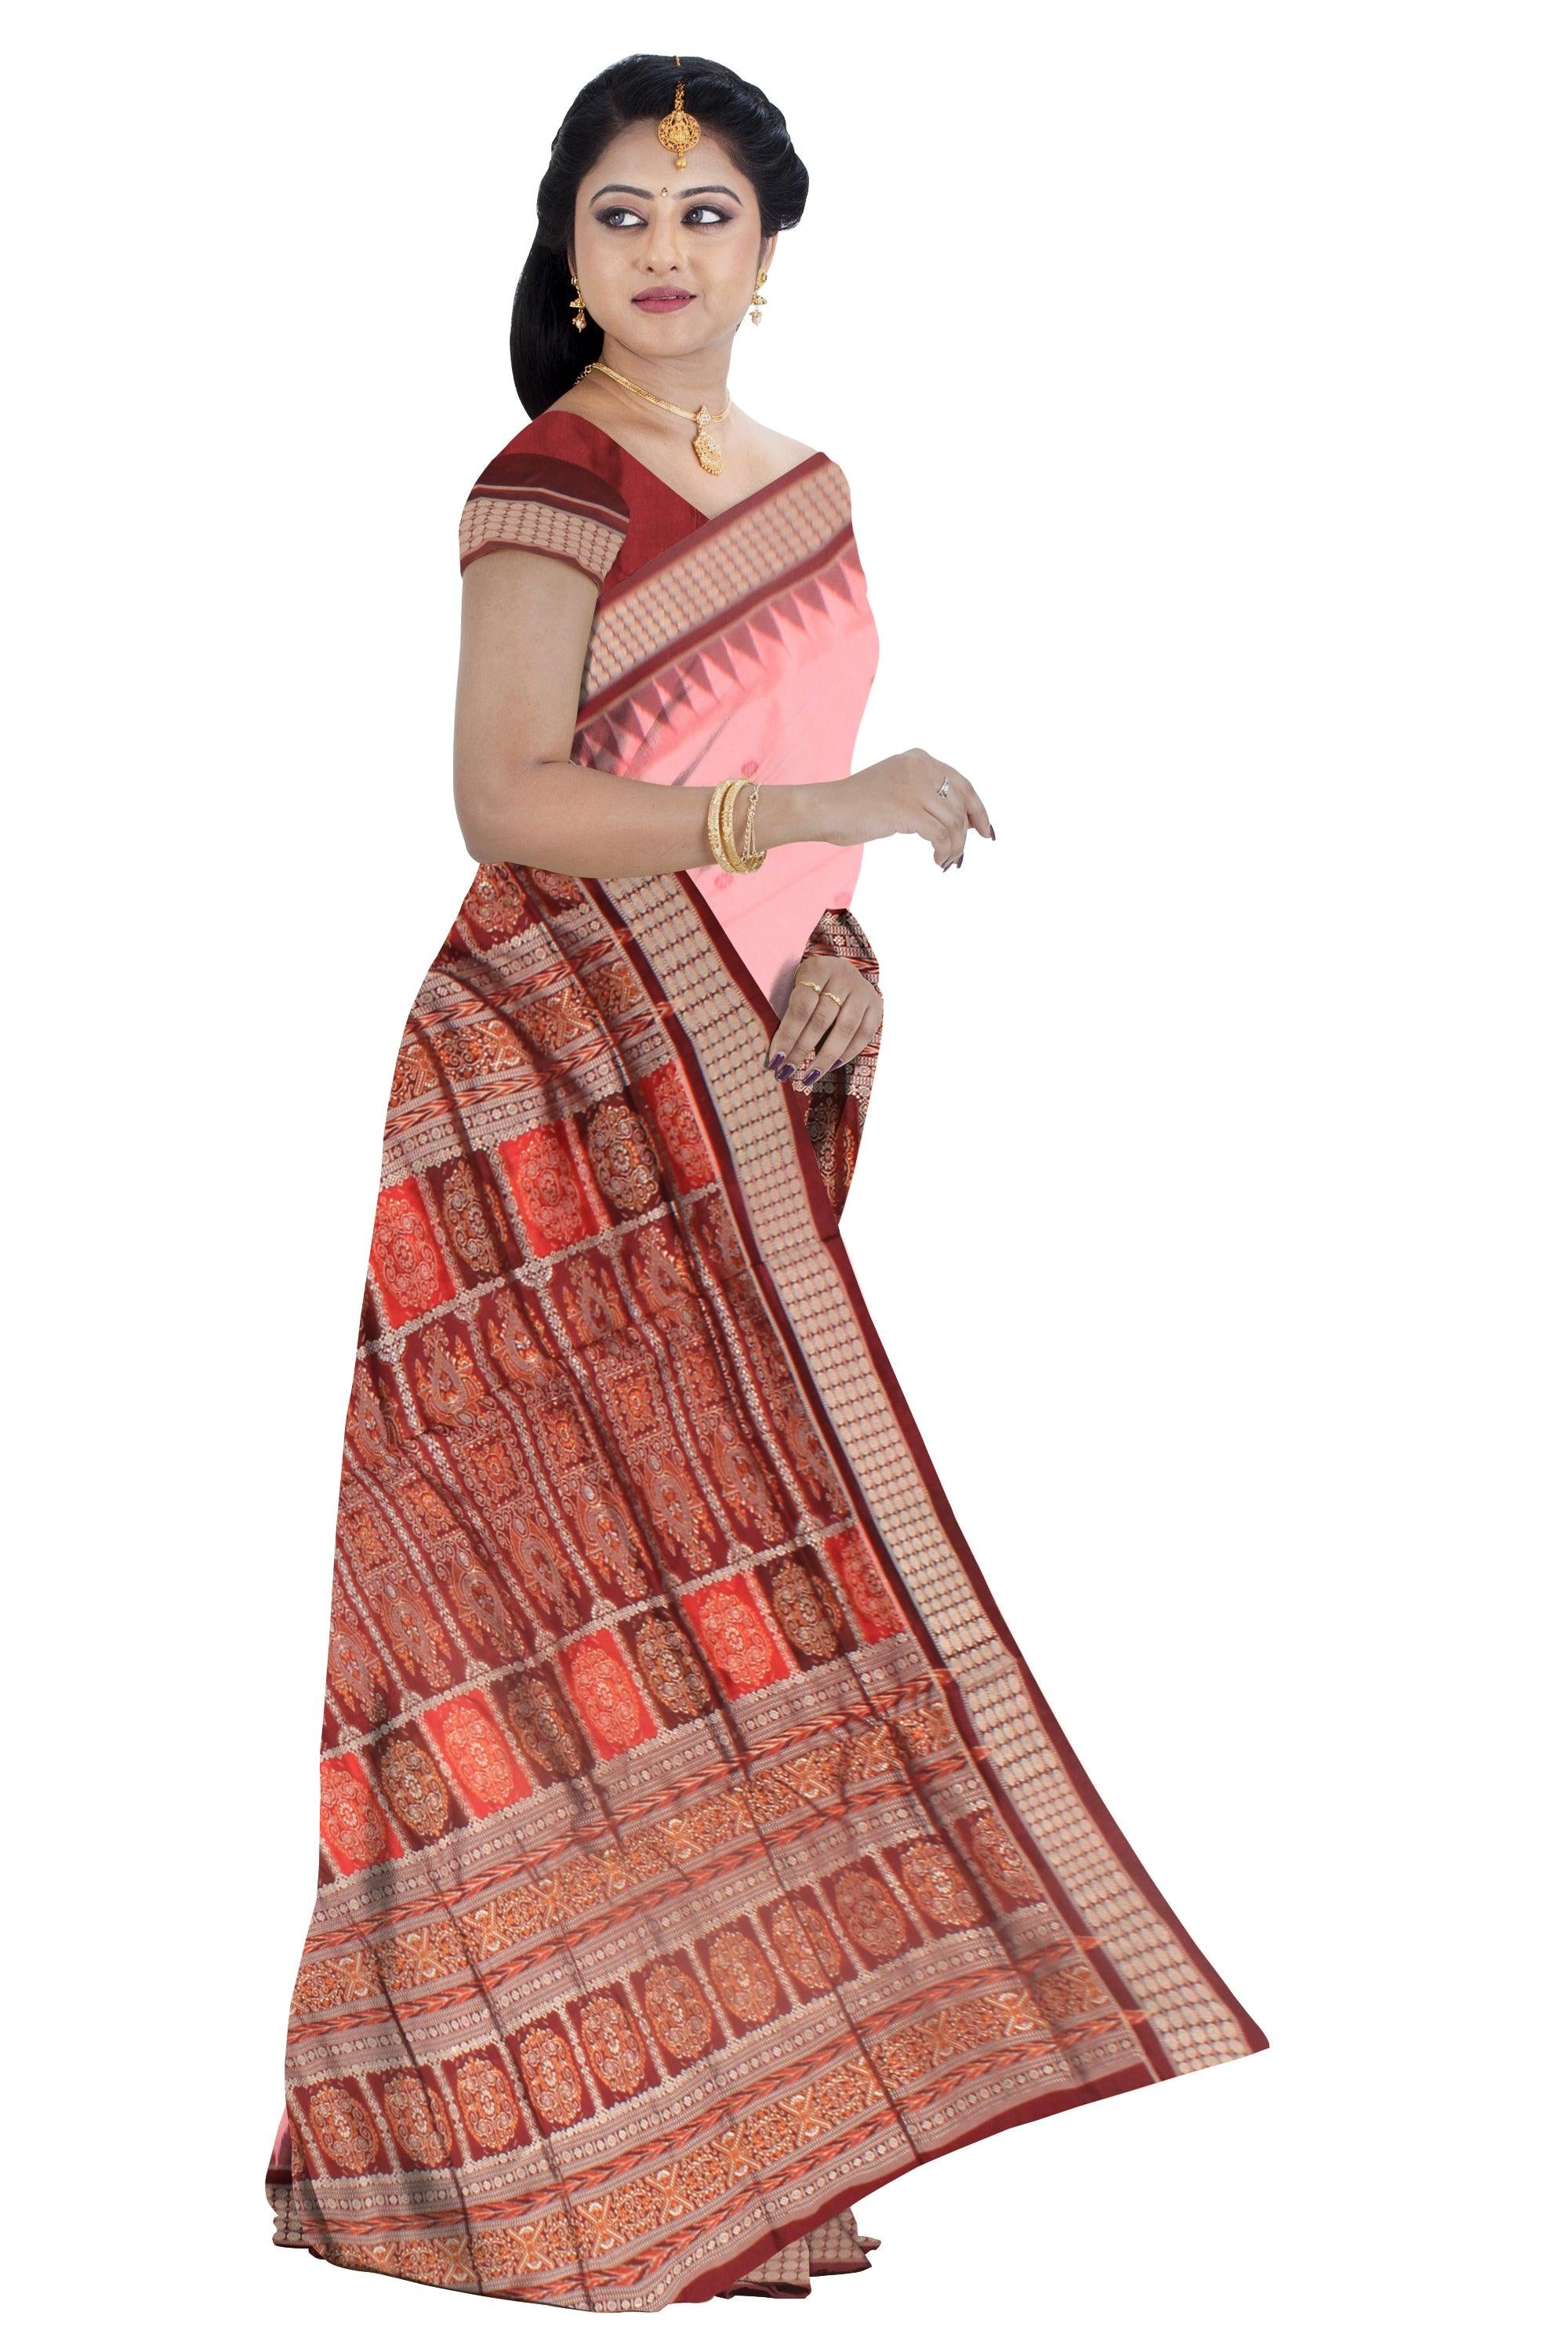 BABY PINK AND MAROON COLOR BOOTY PATTERN PATA SAREE , ATTACHED WITH BLOUSE PIECE. - Koshali Arts & Crafts Enterprise